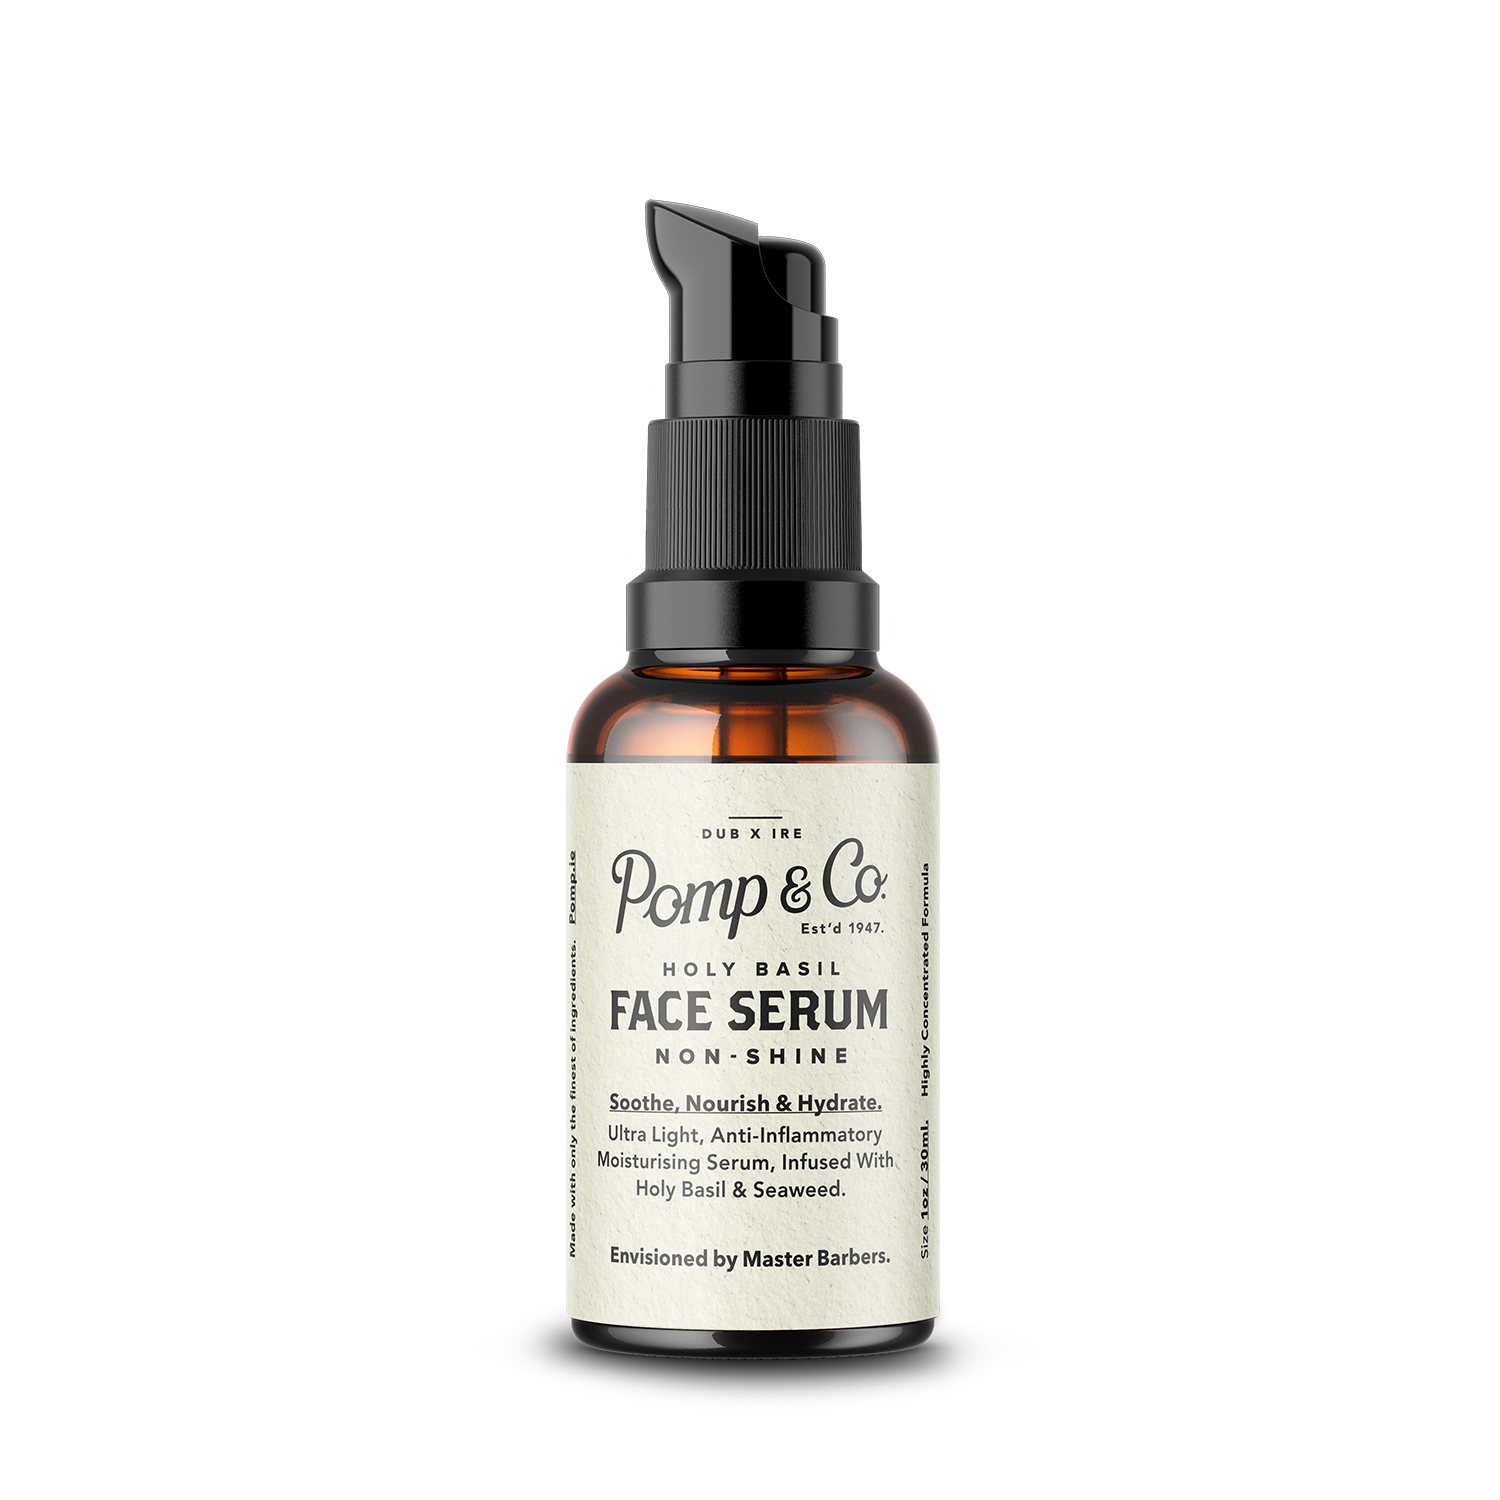 Pomp_FaceSerum_Render_30ml_WR_AW.png